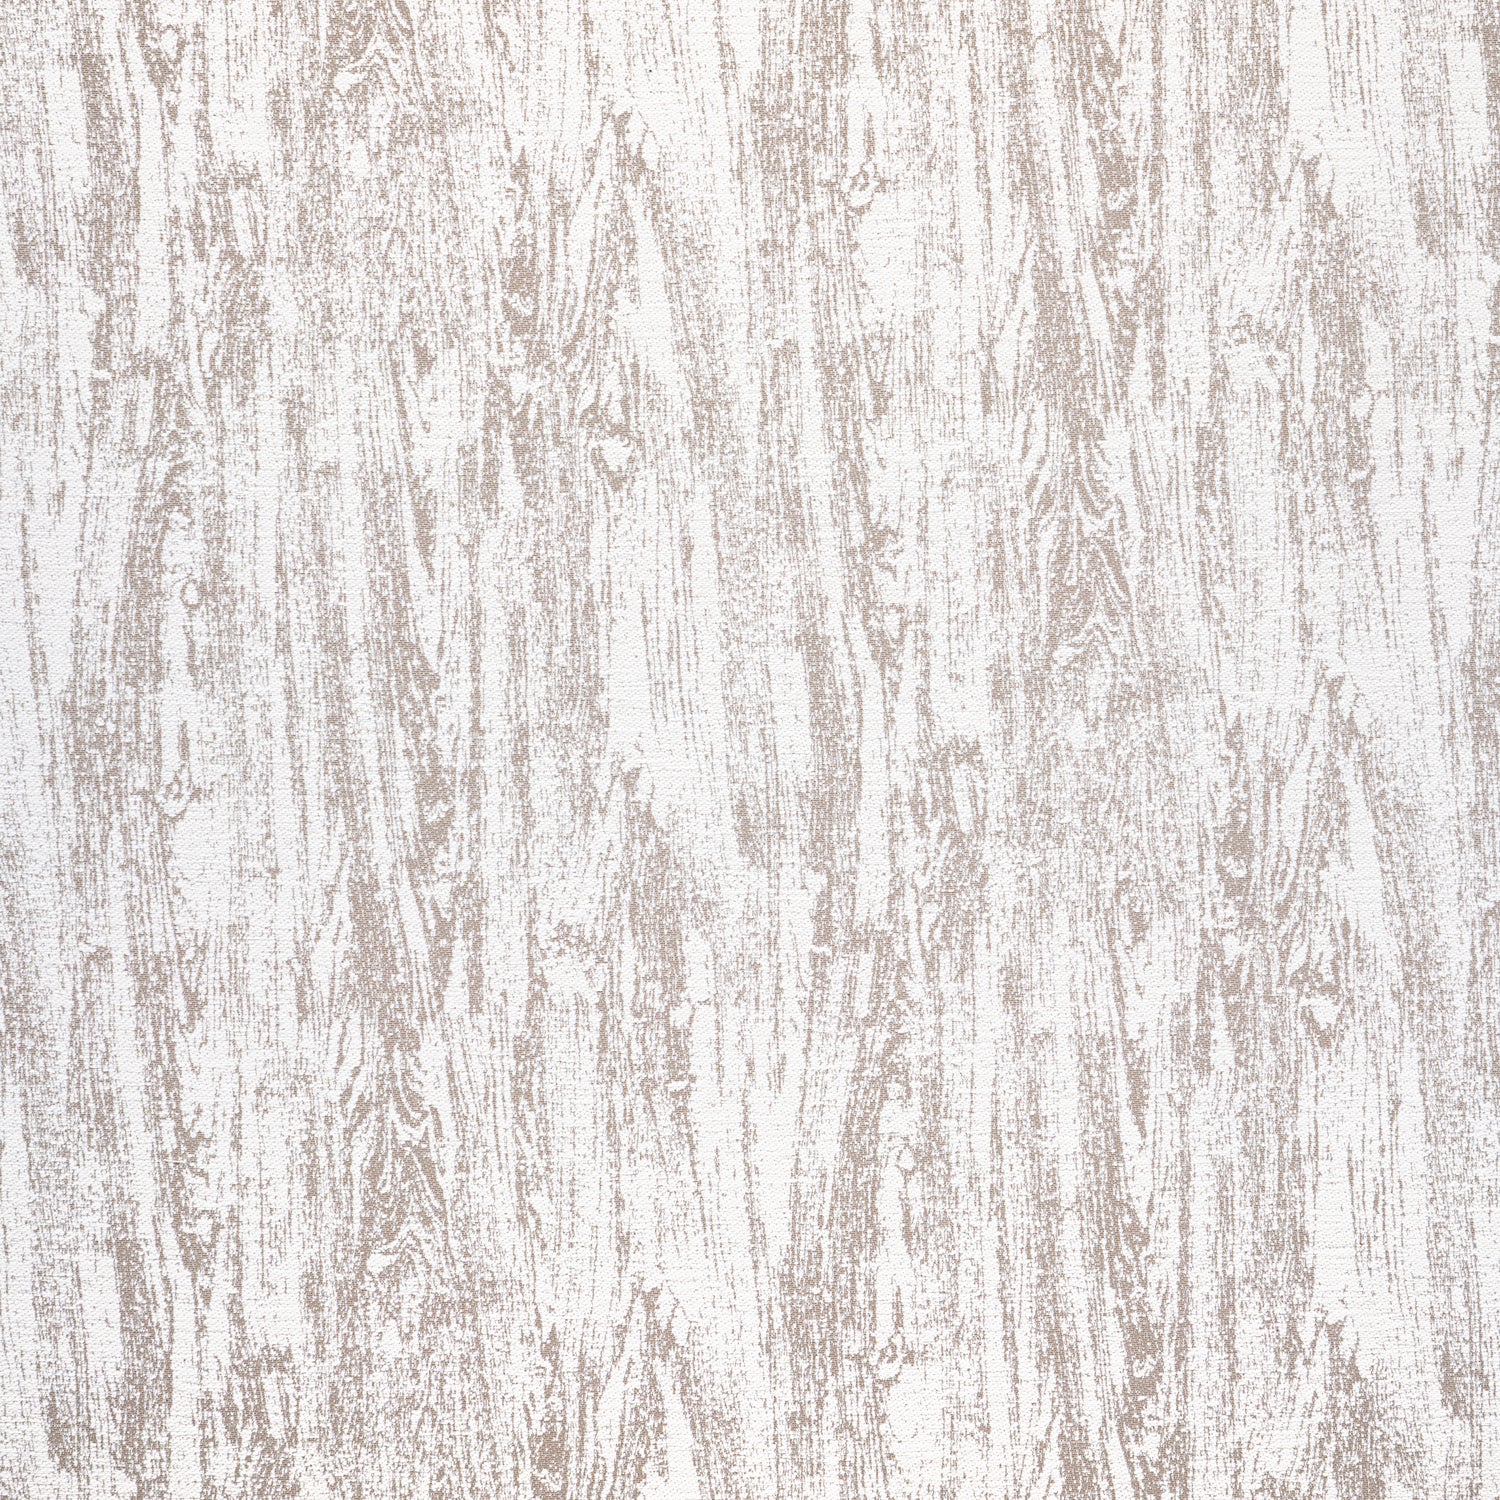 Pine Grove fabric in walnut color - pattern number W78324 - by Thibaut in the  Sierra collection